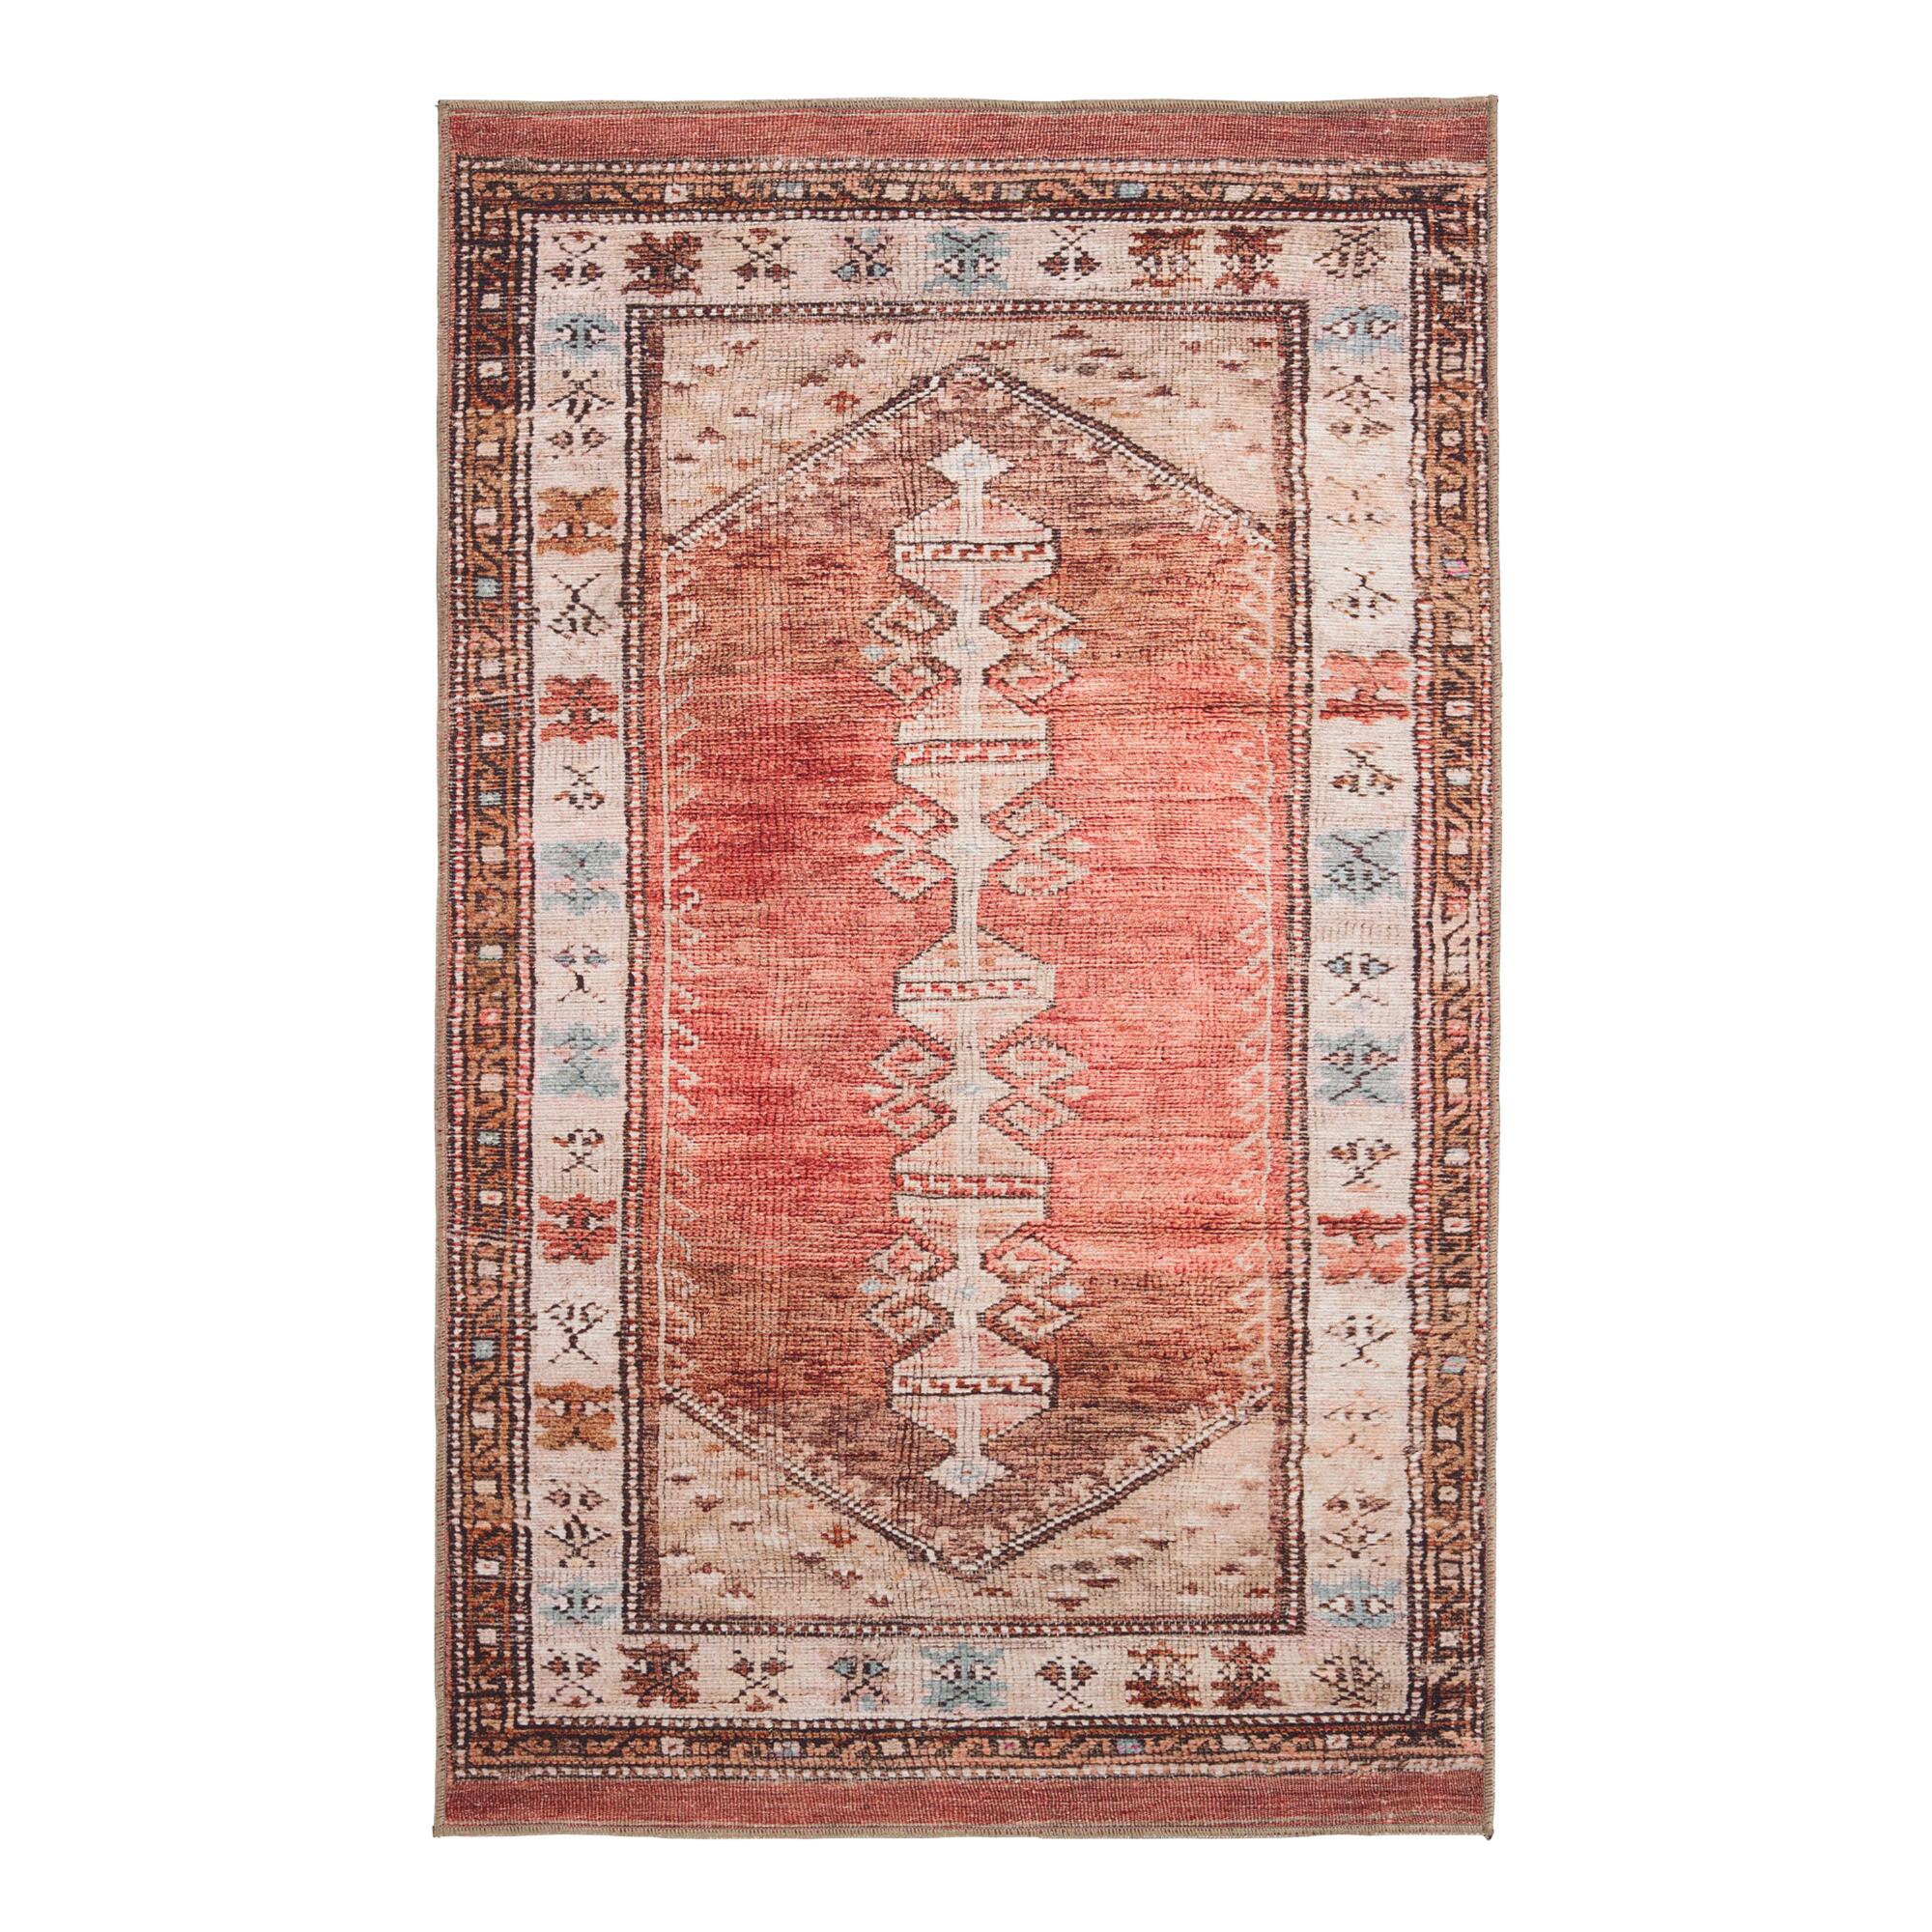 Terracotta and Beige Persian Style Izmir Area Rug: Red - Polyester - Runner by World Market